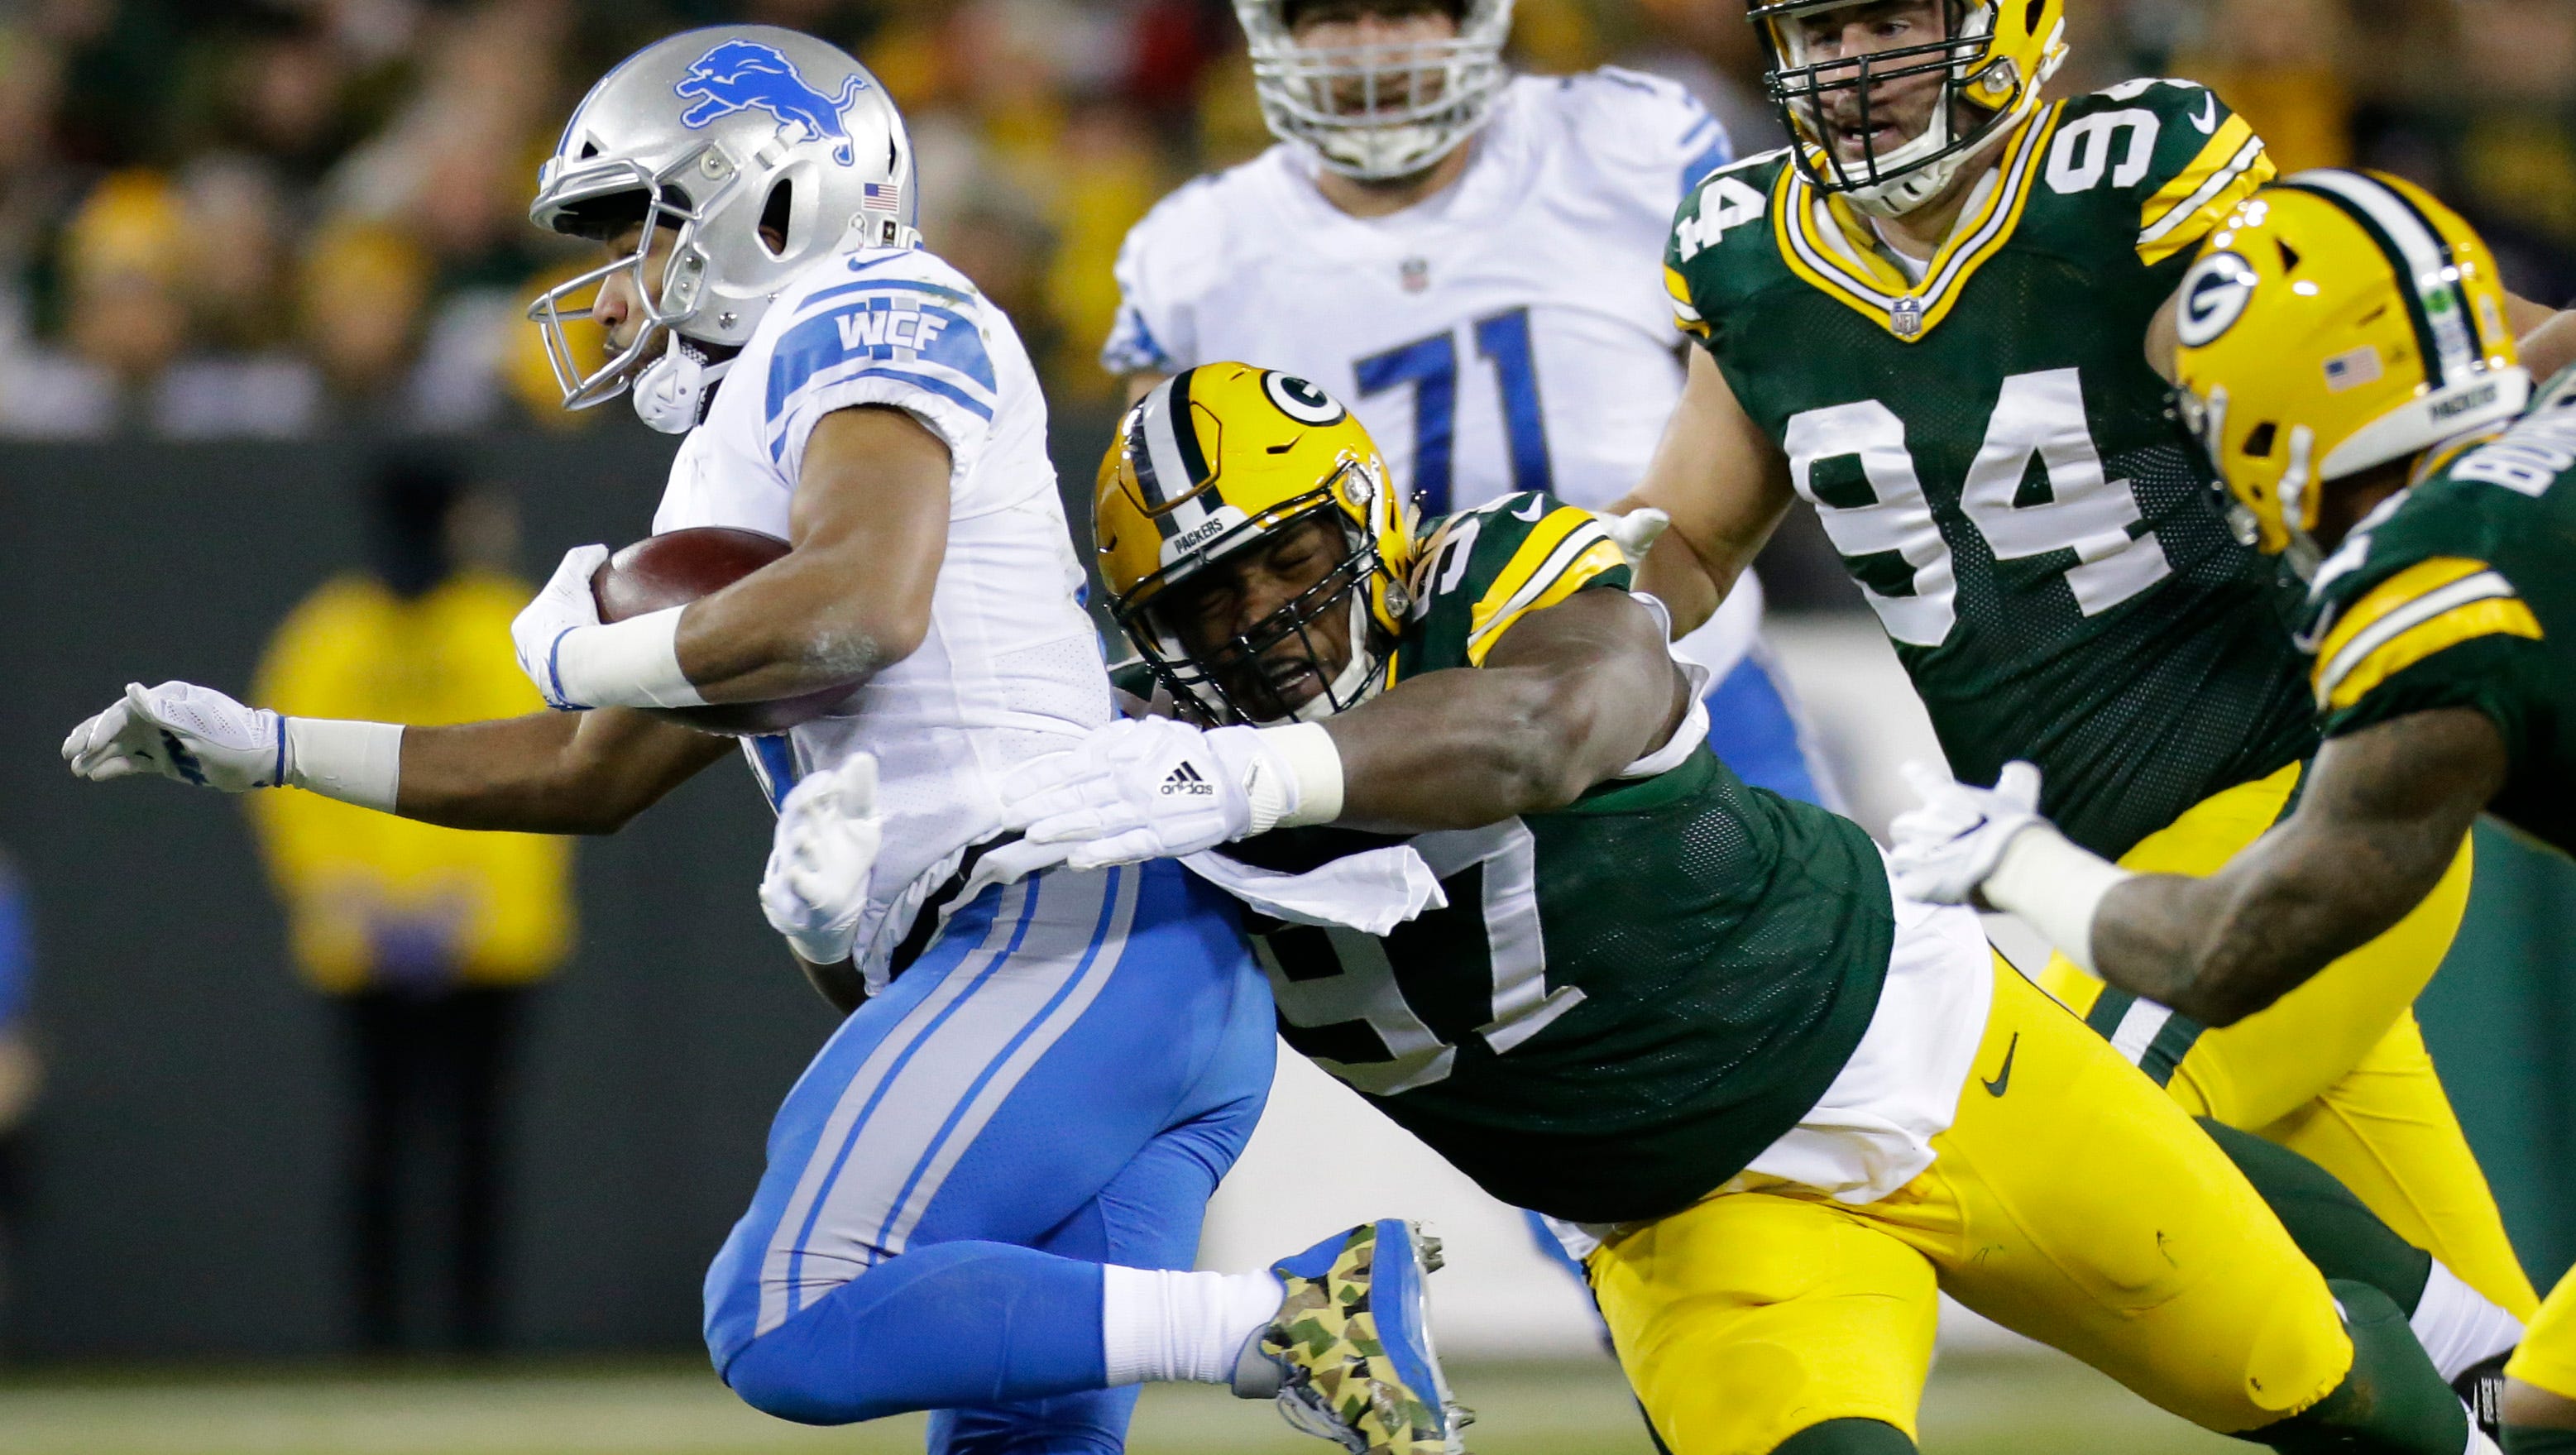 Detroit Lions' Golden Tate (15) is stopped short of  first down by Green Bay Packers nose tackle Kenny Clark (97) during the second quarter of their game Monday, November 6, 2017 at Lambeau Field in Green Bay, Wis.